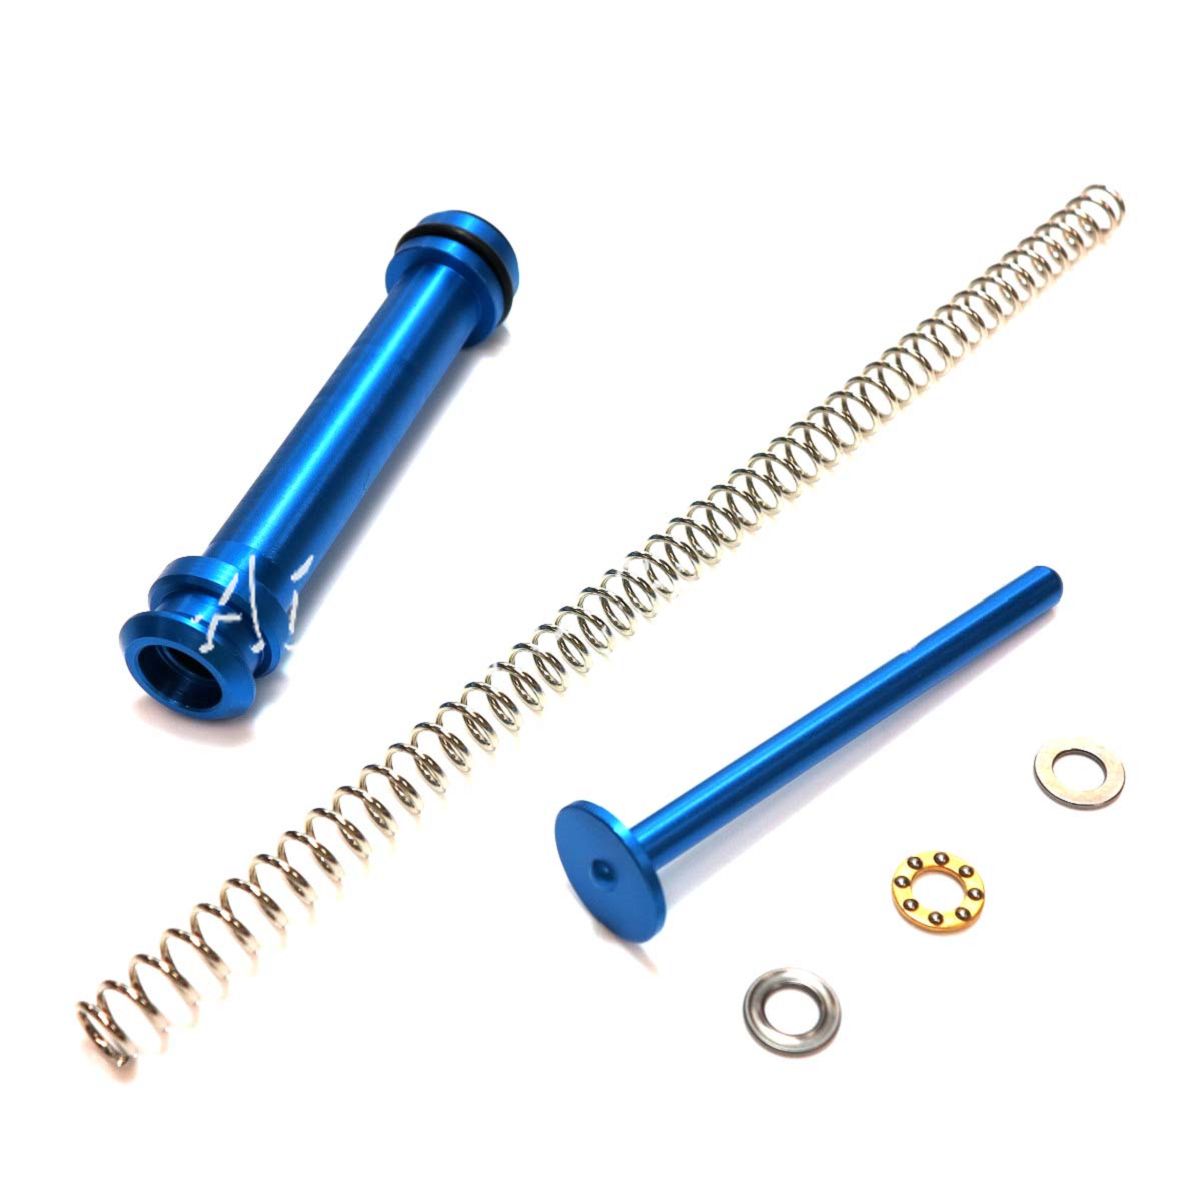 AEG Gear PPS CNC Aluminum Power Up Kit For VSR-10/MB03/MB07 Series AEG Airsoft Sniper